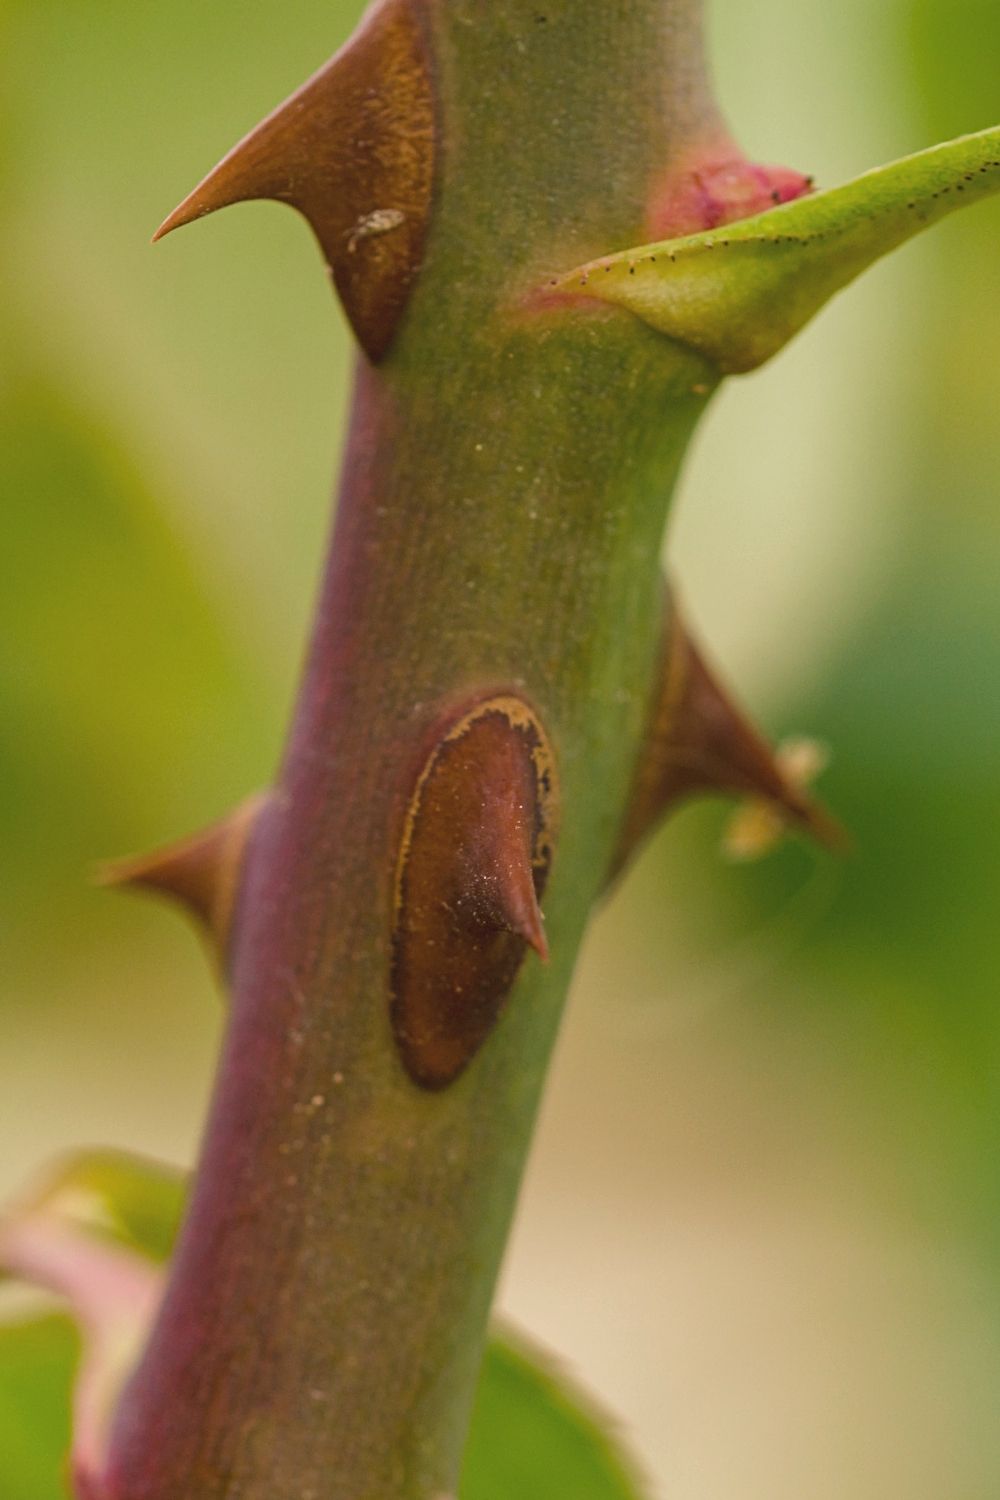 The thorns in the rose's stem helps in stopping cats from eating them